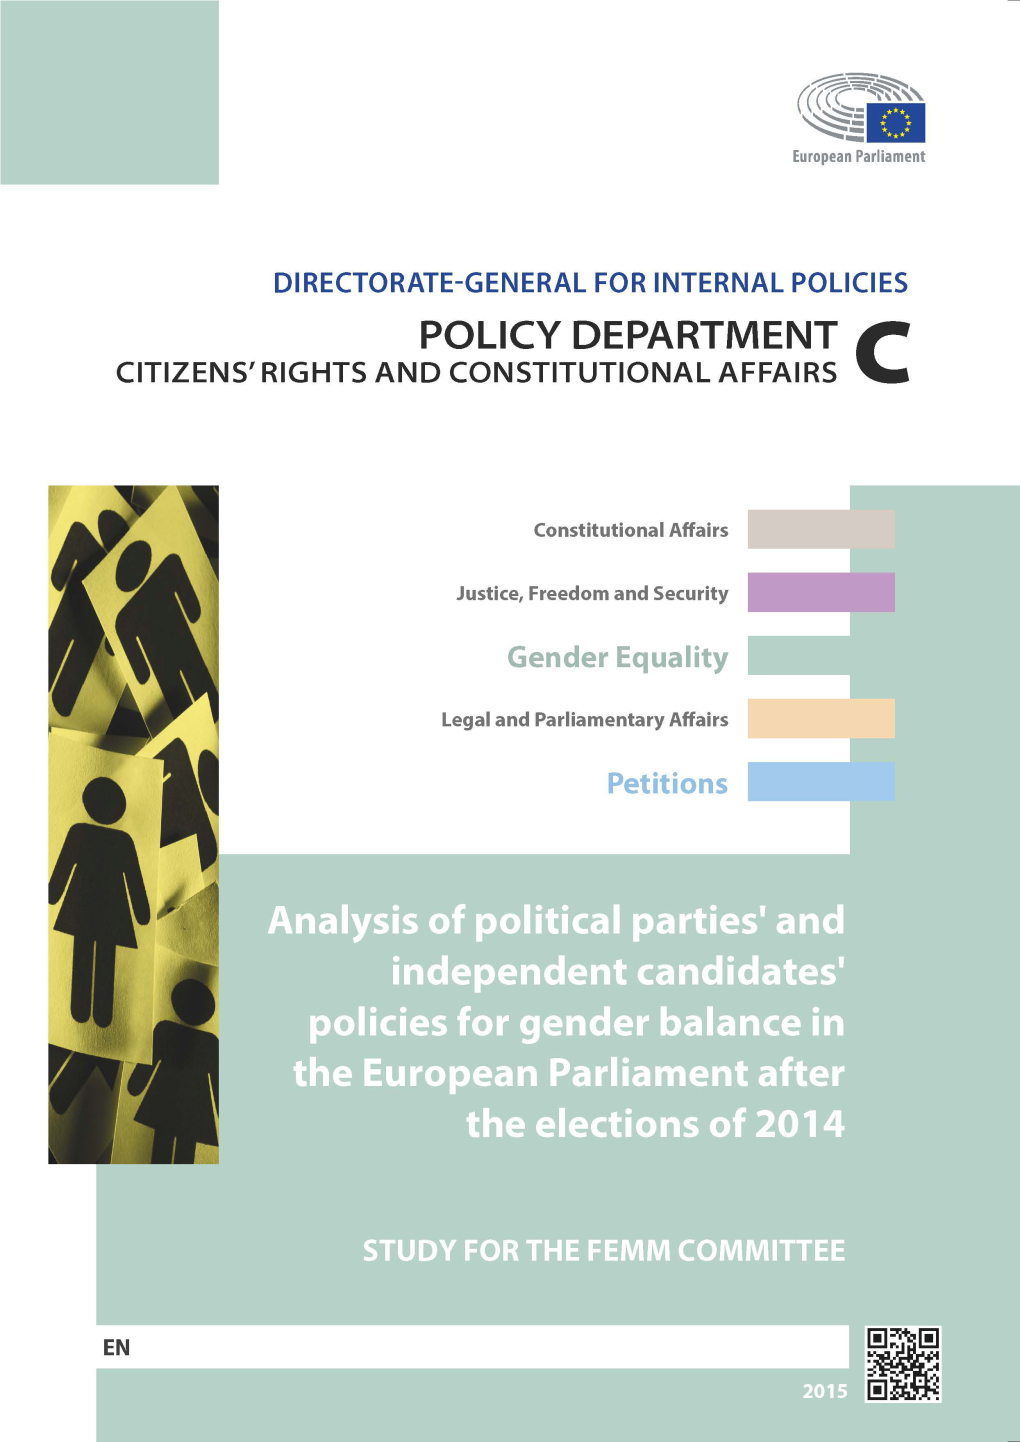 Analysis of Political Parties' Independent Candidates' Policies